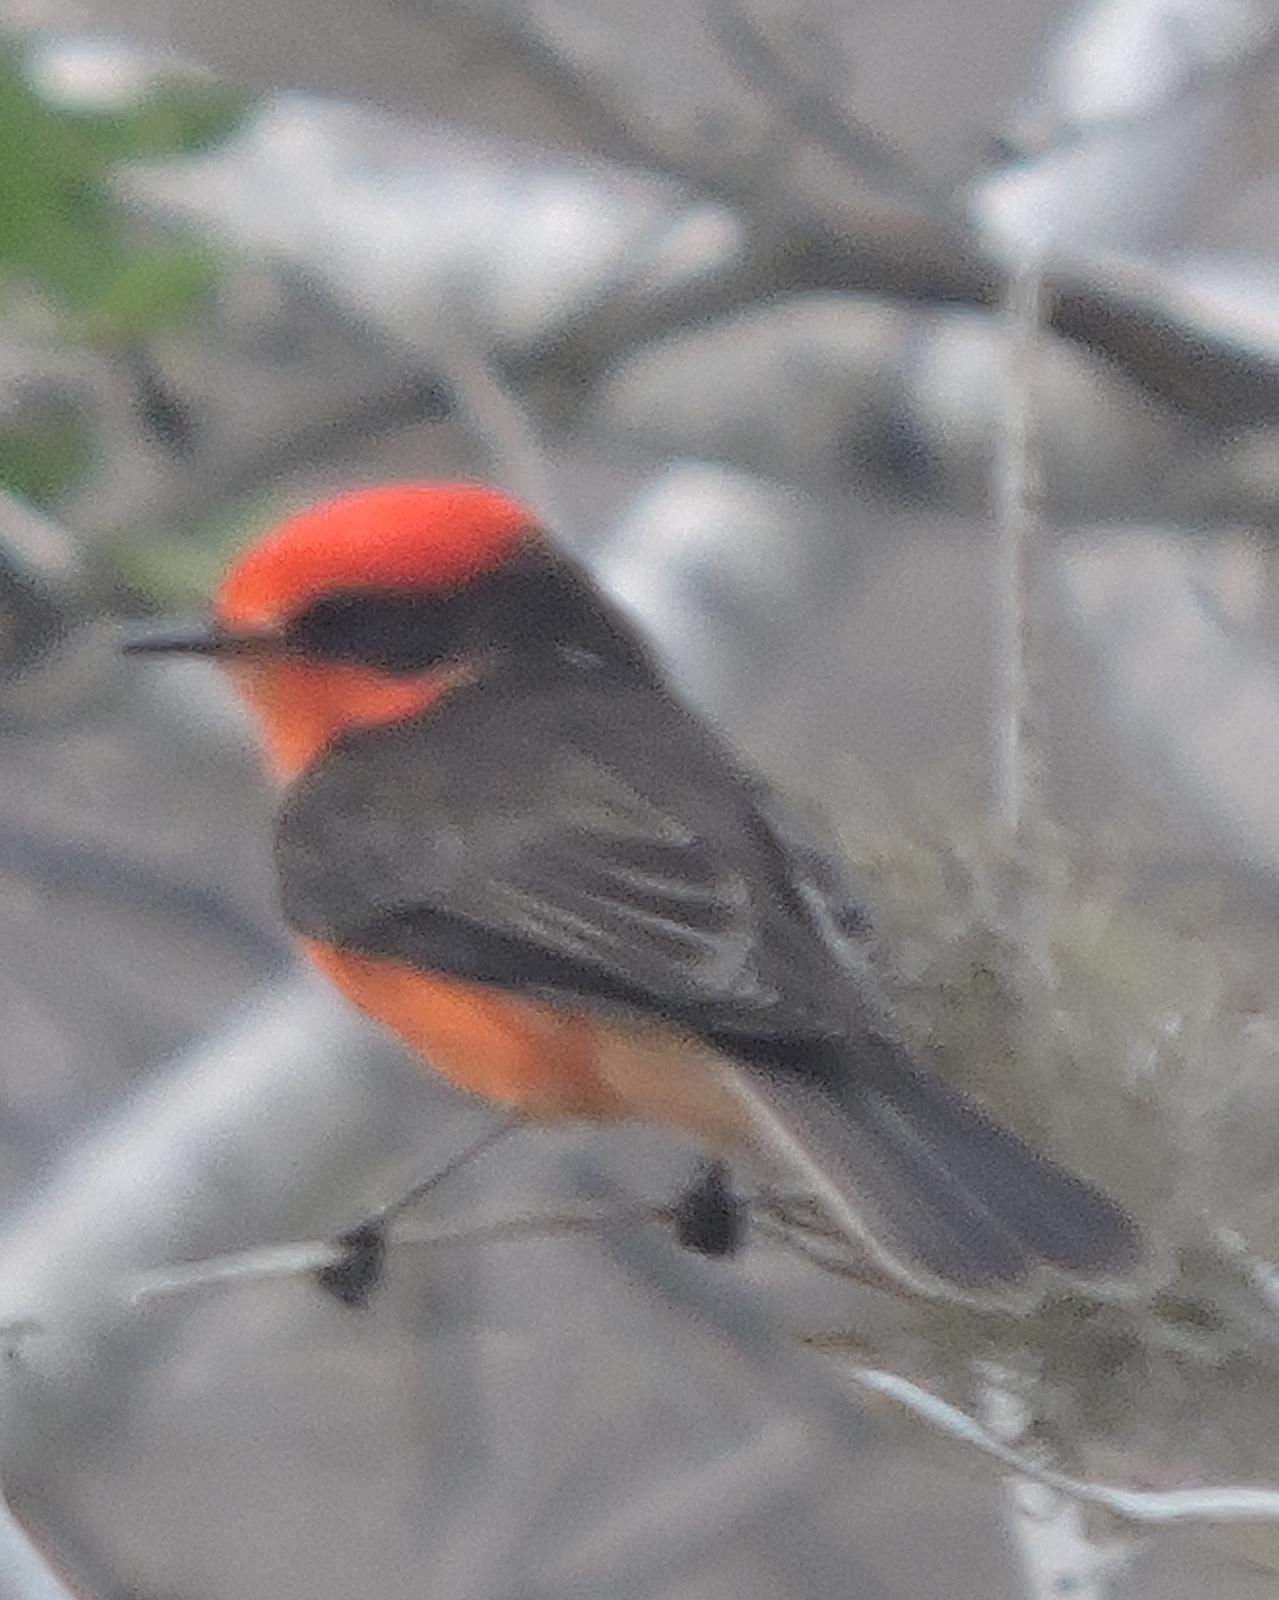 Vermilion Flycatcher (Galapagos) Photo by Peter Lowe